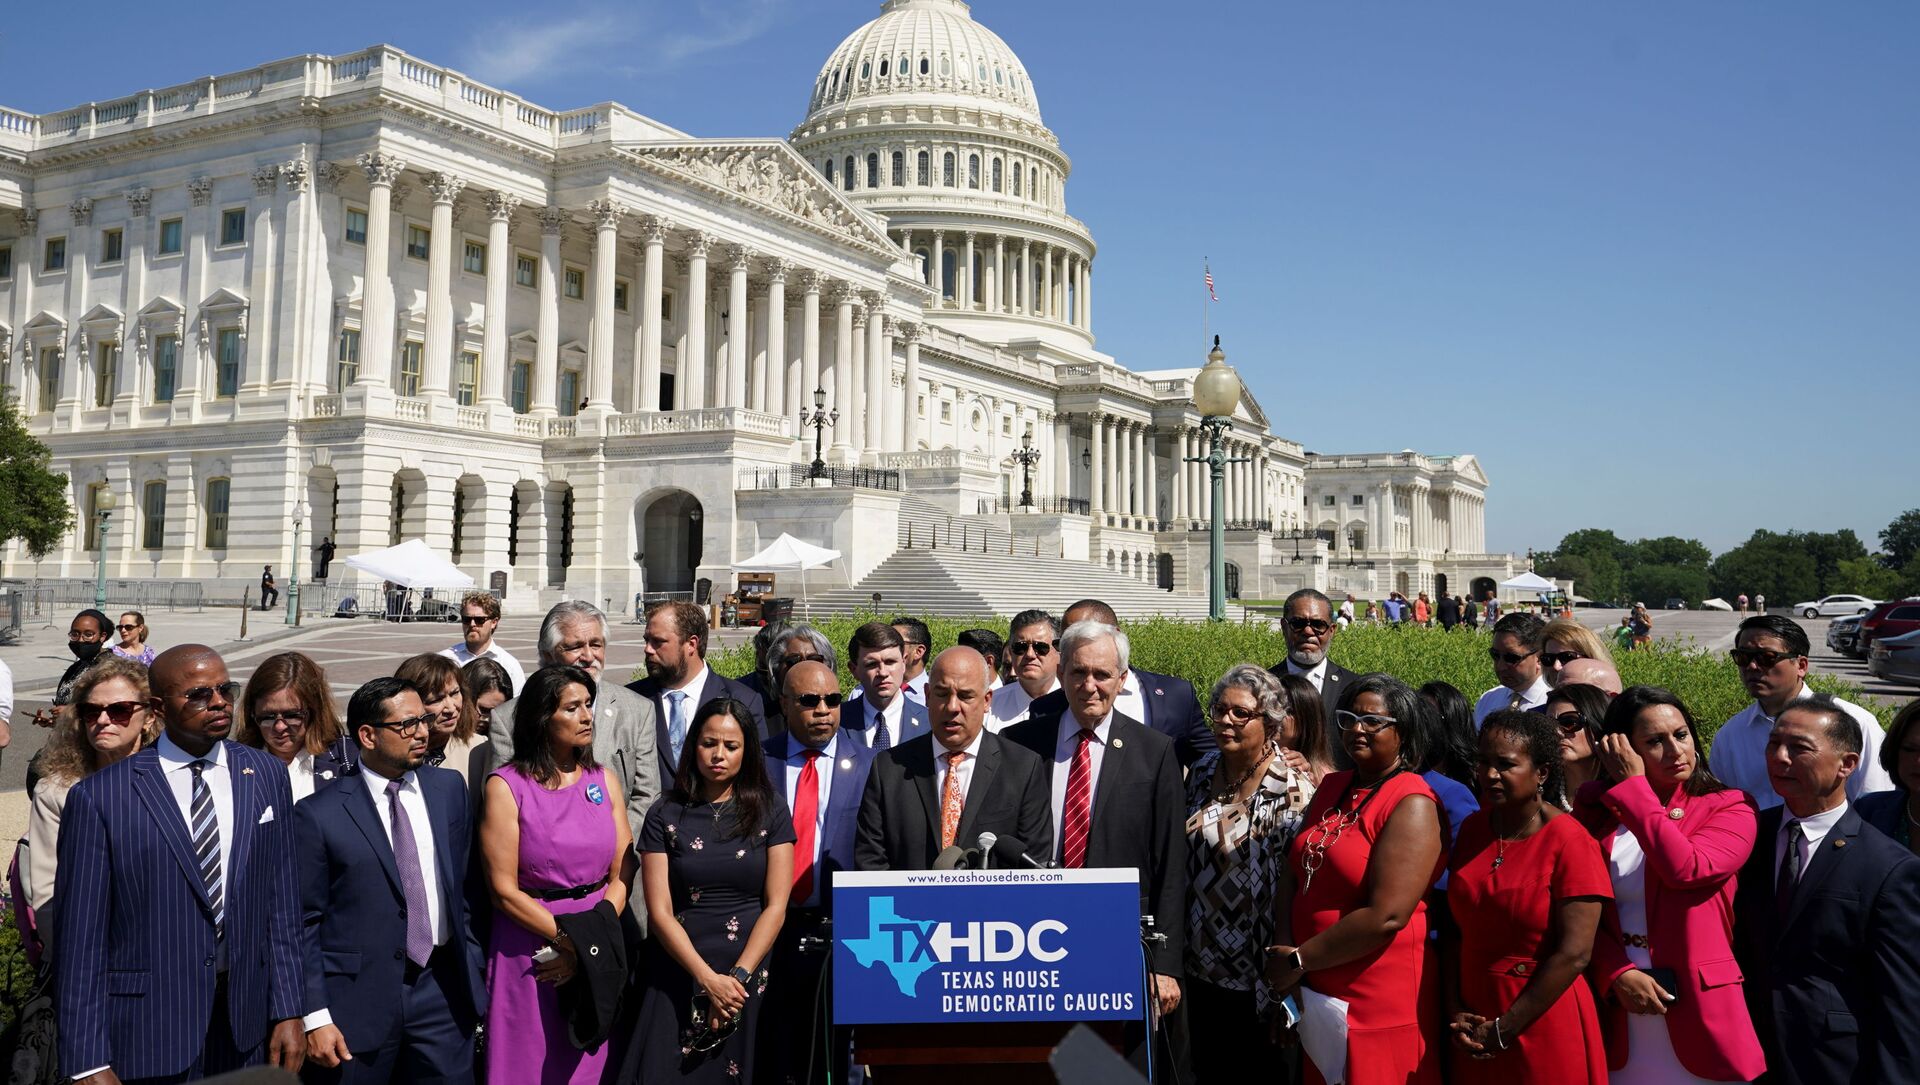 Representative Chris Turner (D-TX) joins other Democratic members of the Texas House of Representatives, who are boycotting a special session of the legislature in an effort to block Republican-backed voting restrictions, as they speak in front of the U.S. Capitol in Washington, U.S., July 13, 2021 - Sputnik International, 1920, 19.07.2021